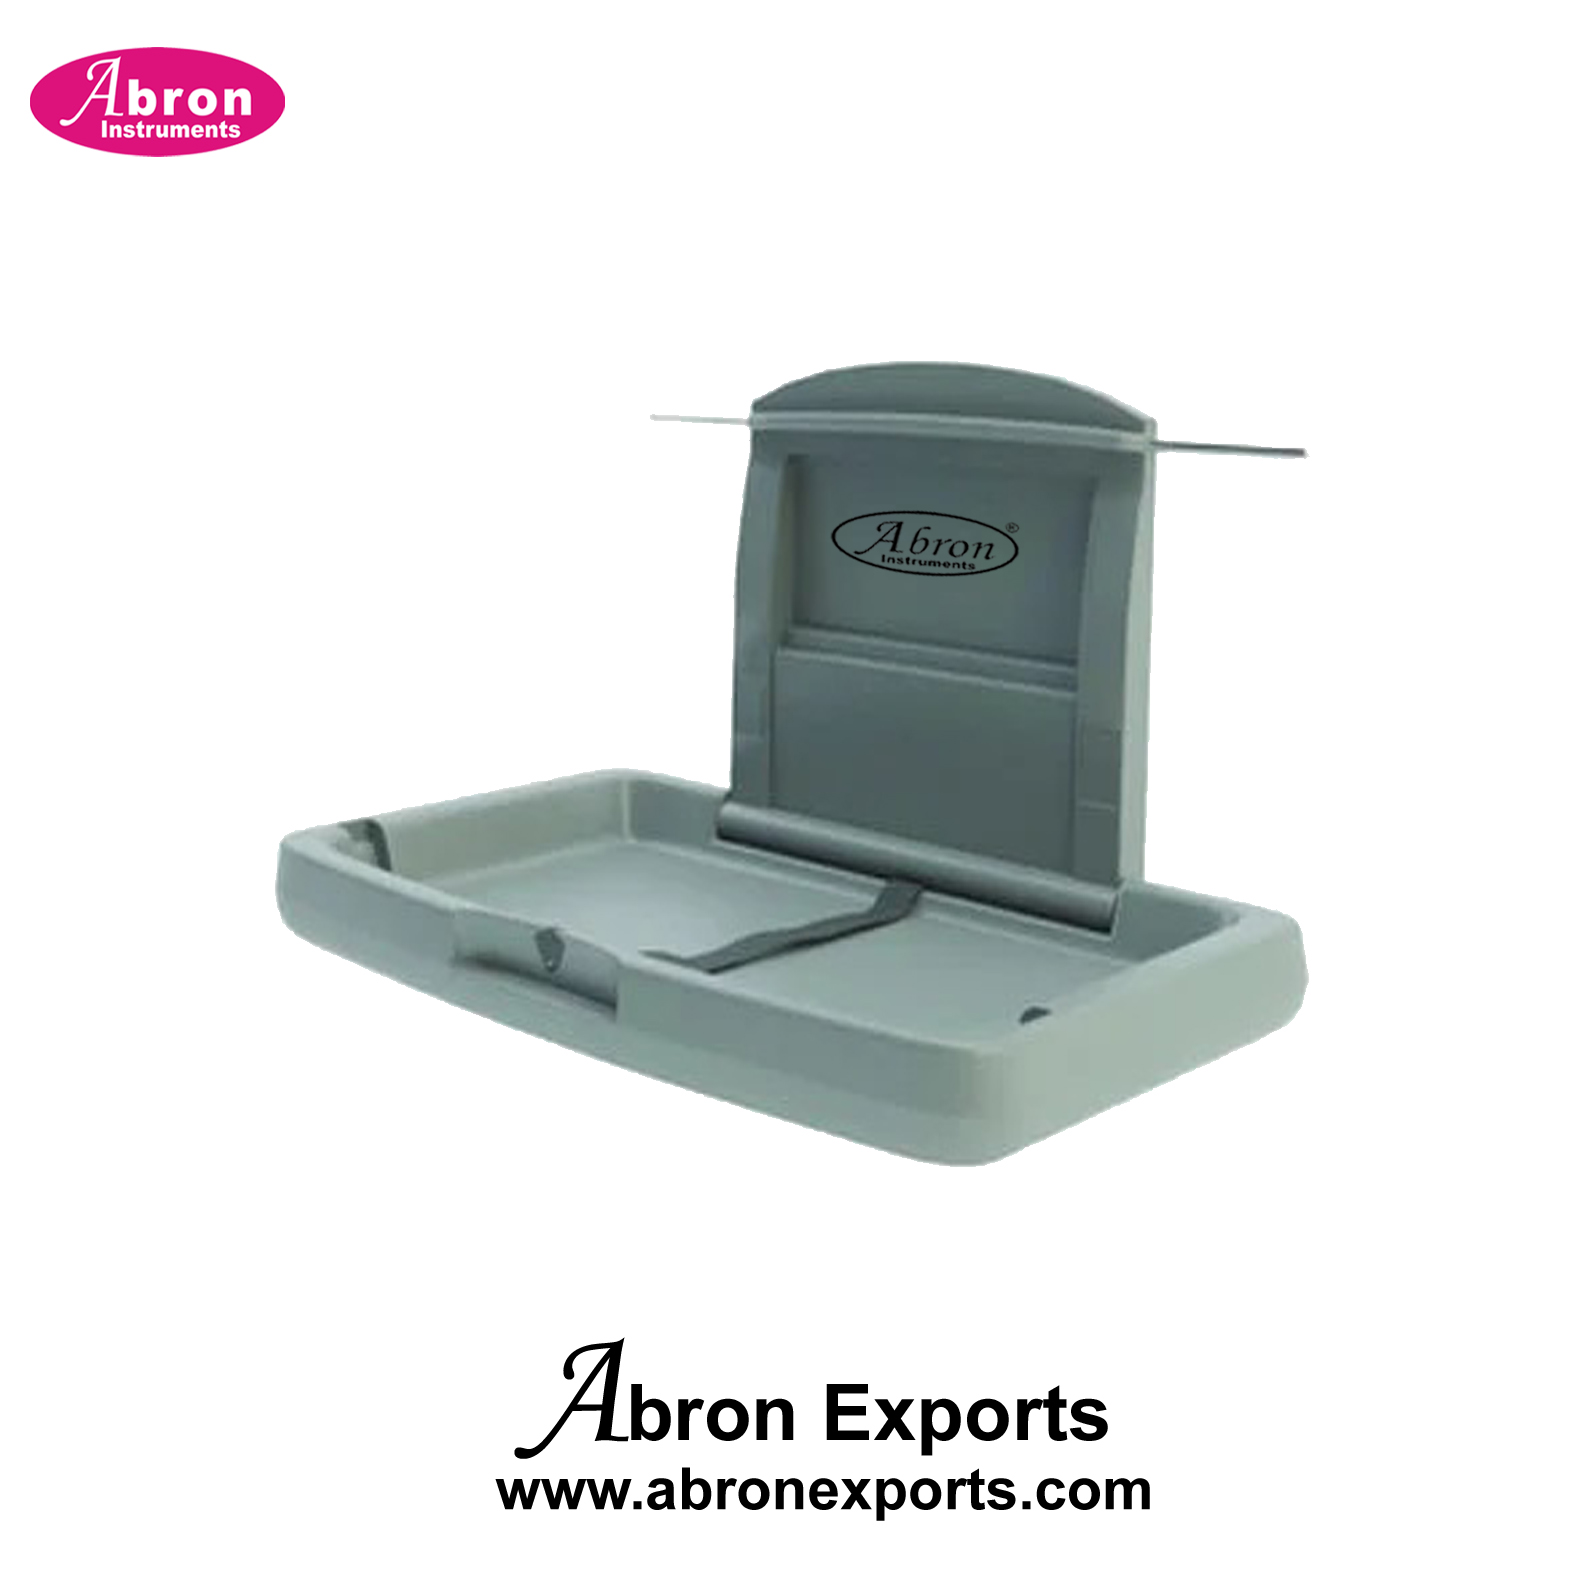 Baby diaper Changing station Table platform folding with accessories holders Airport hospital Abron ABM-2548SD 